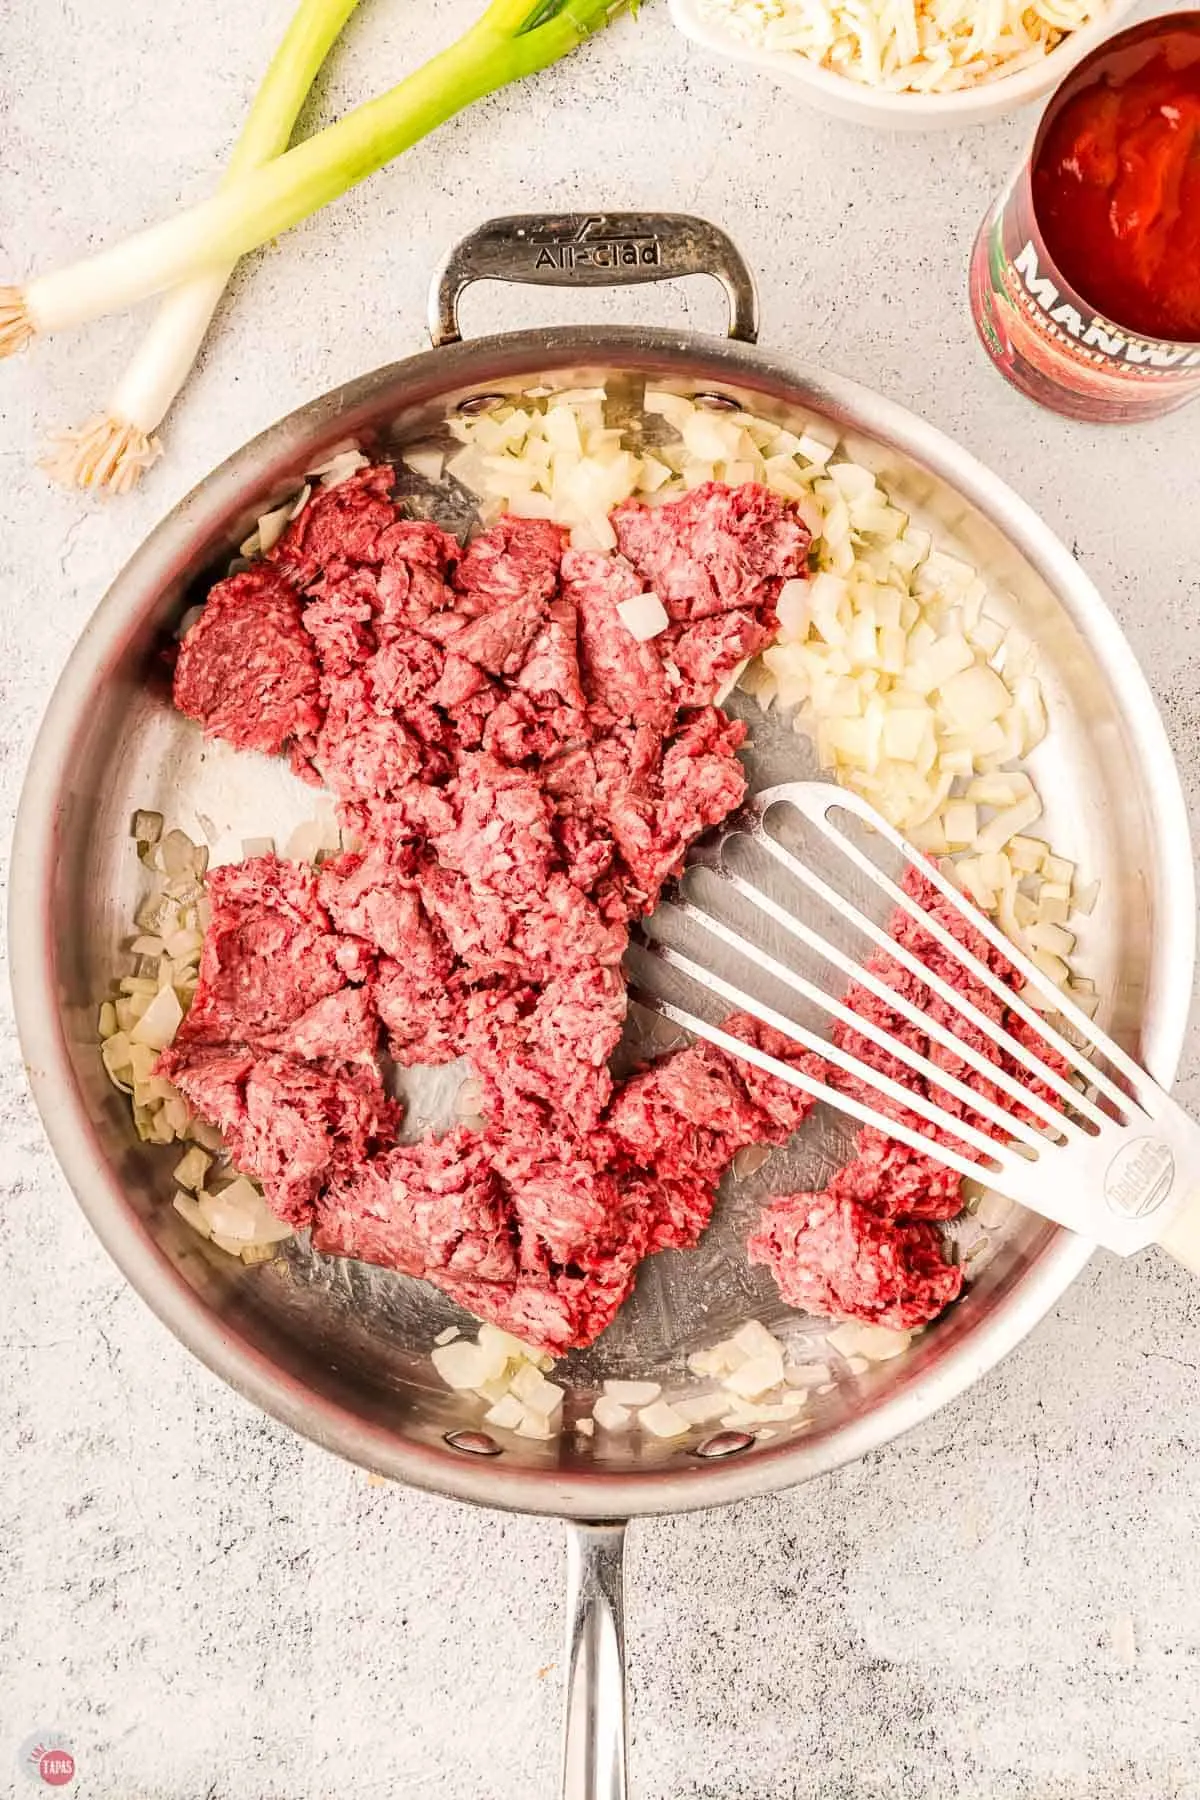 cook the onions and ground beef in a pan